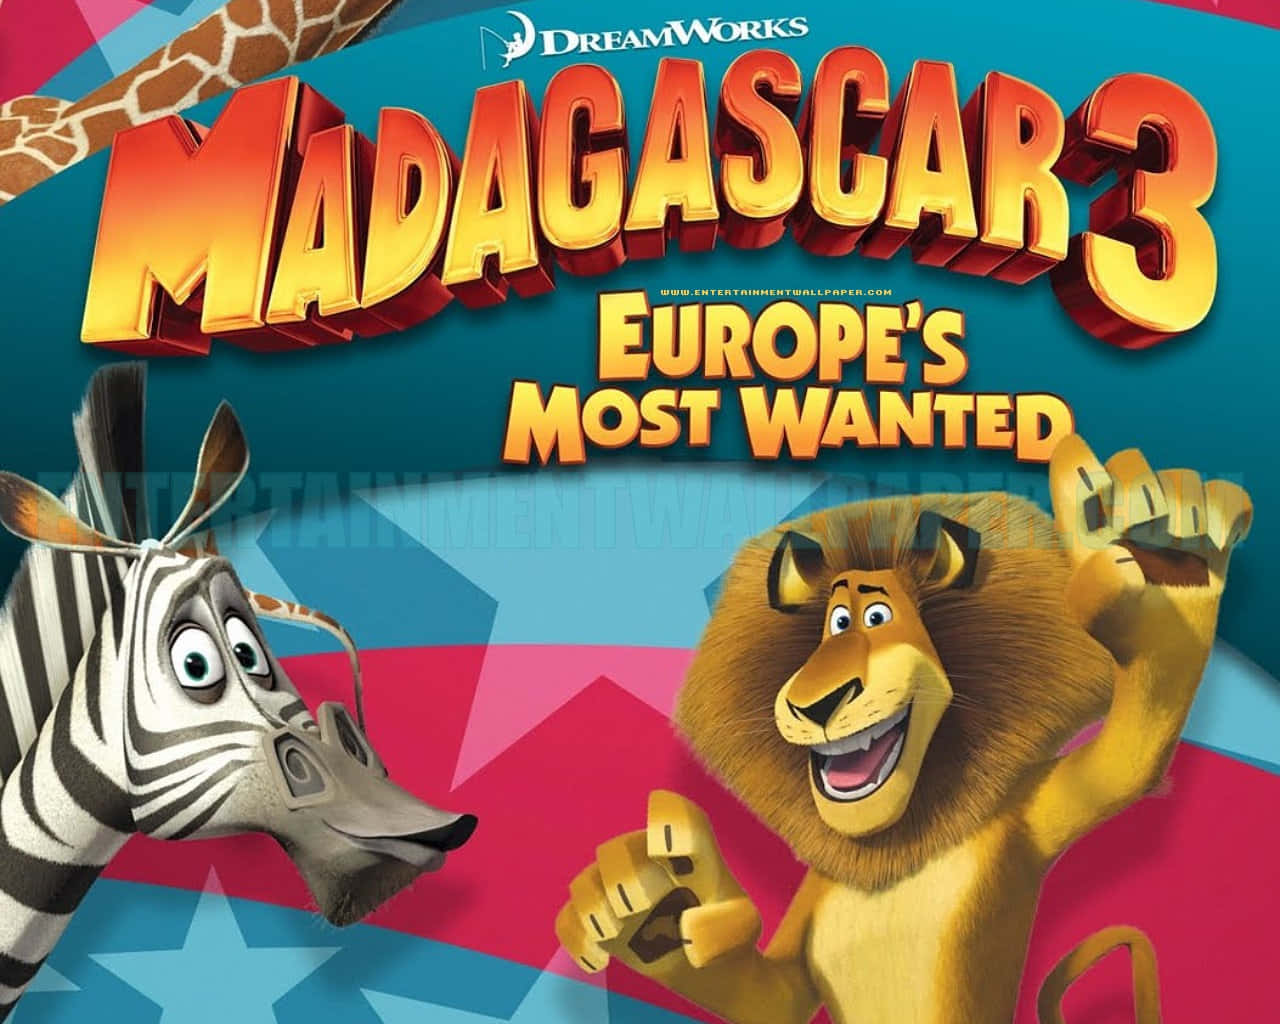 Madagascar3 Europes Most Wanted Movie Poster Wallpaper